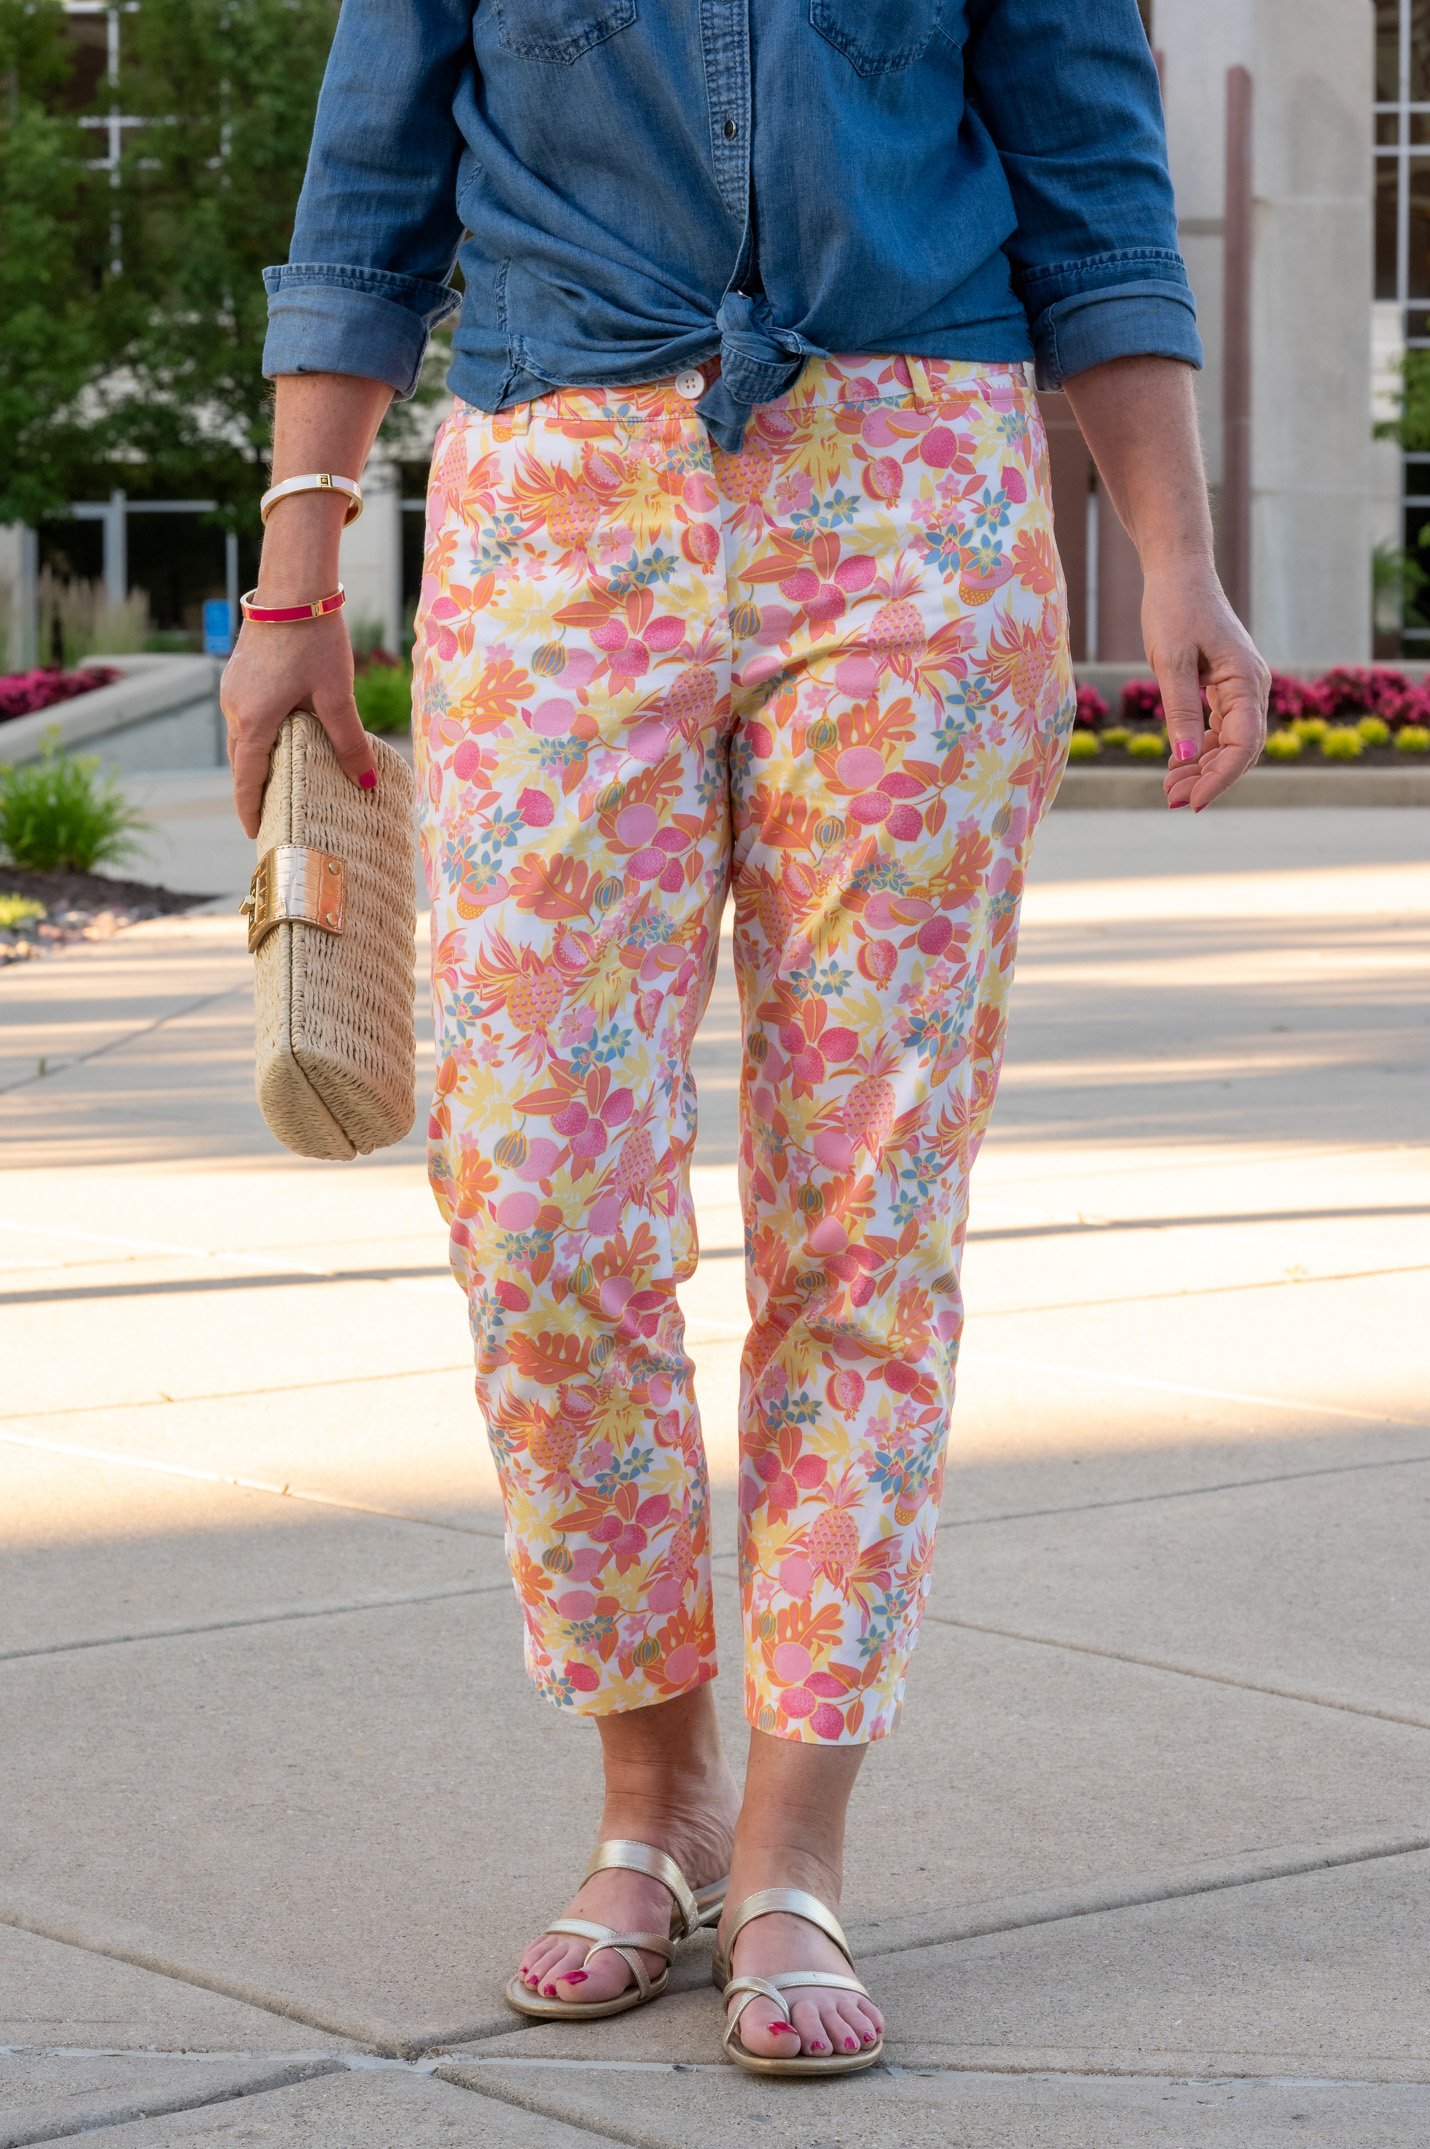 How to Style Floral Pants